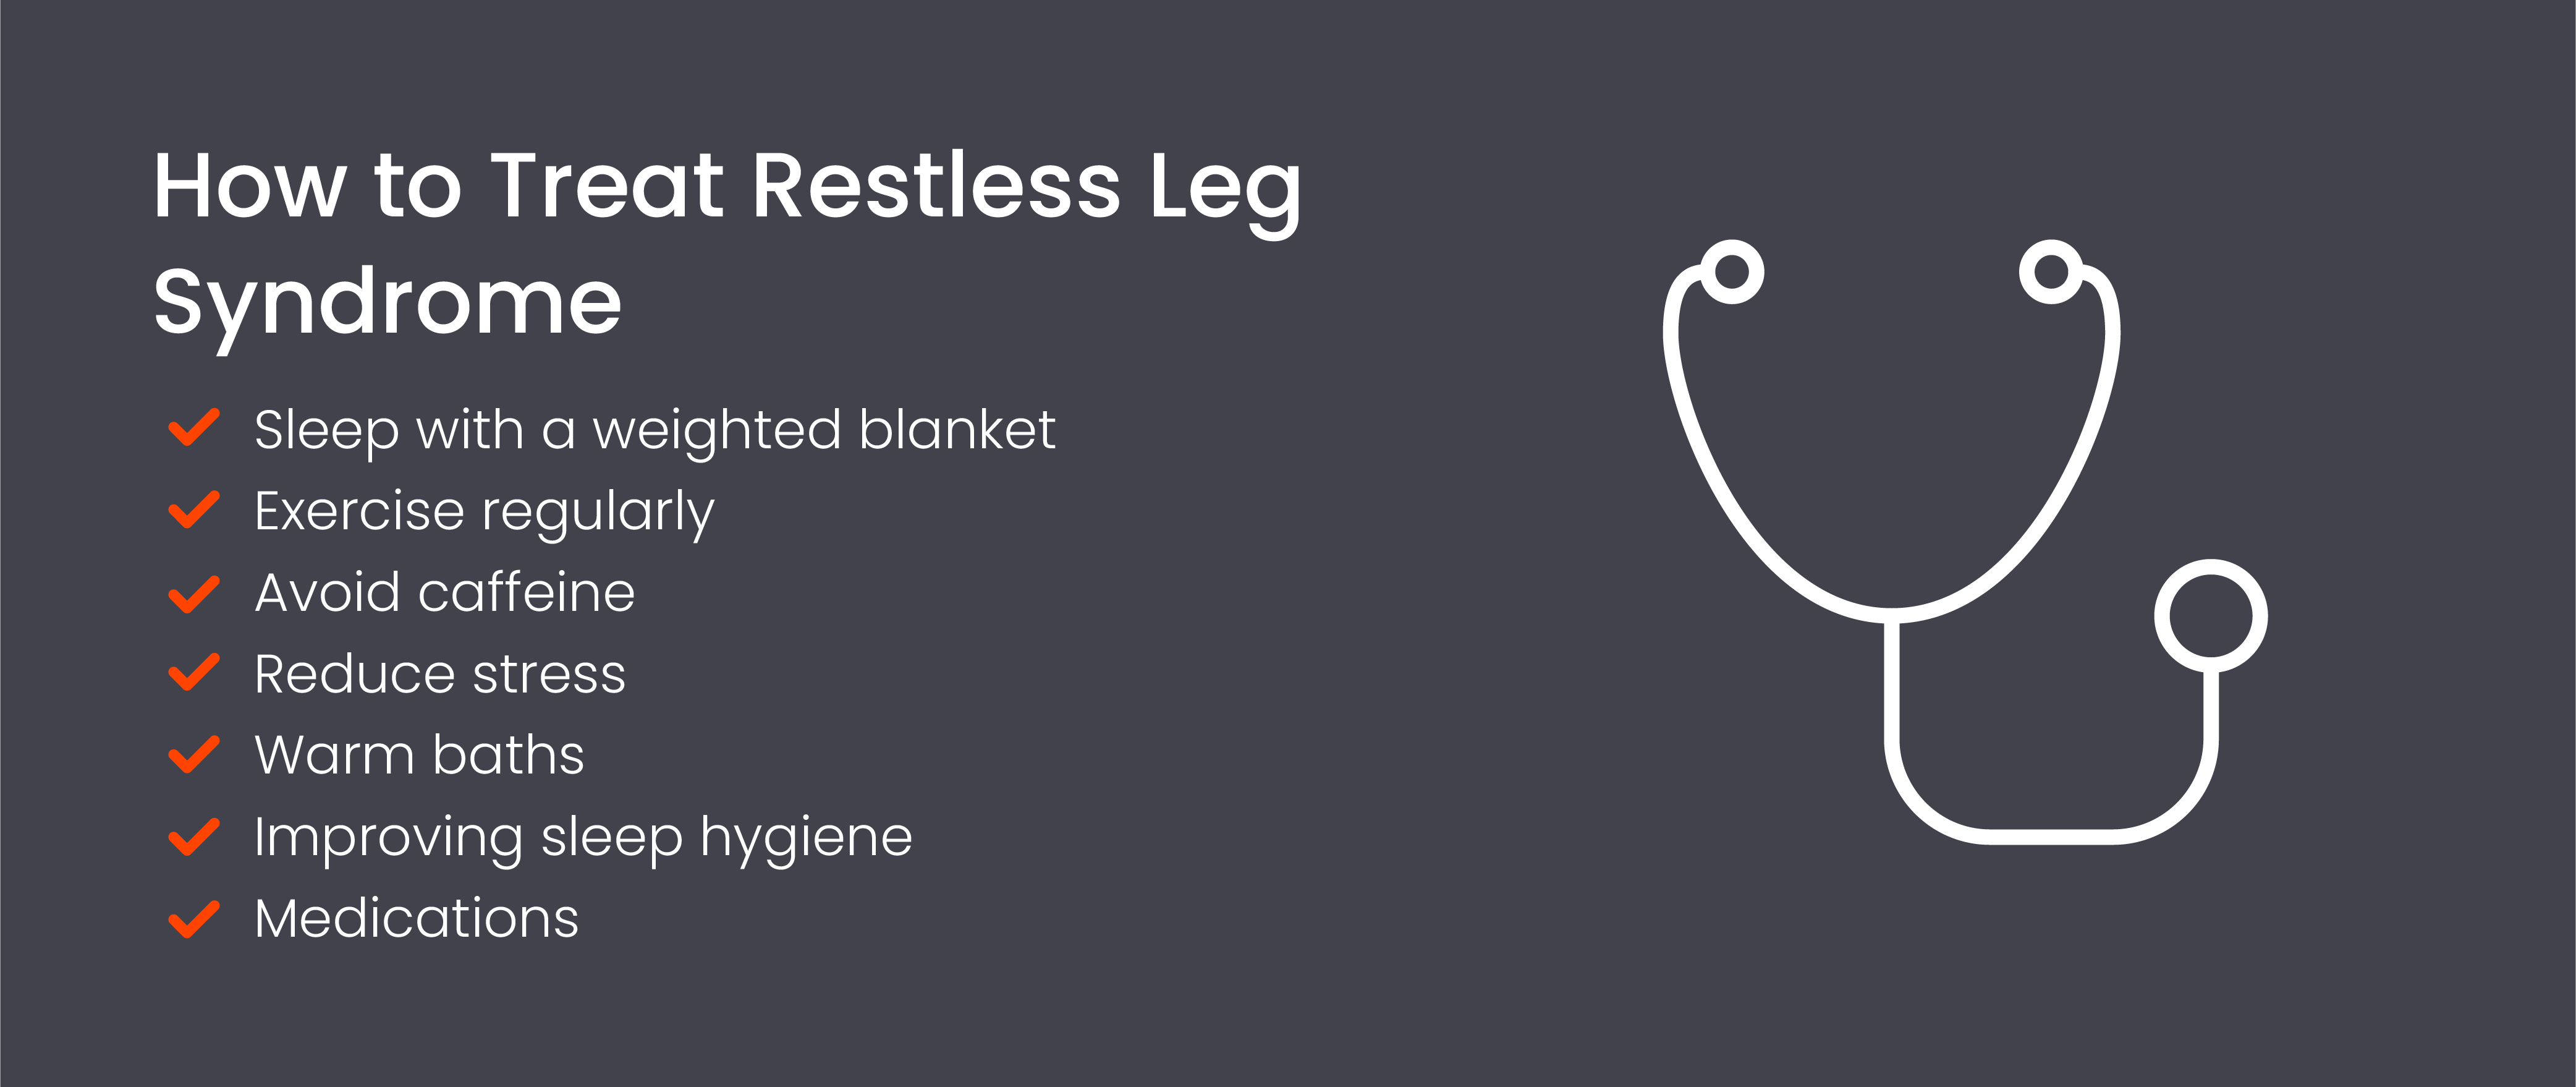 How to treat restless leg syndrome